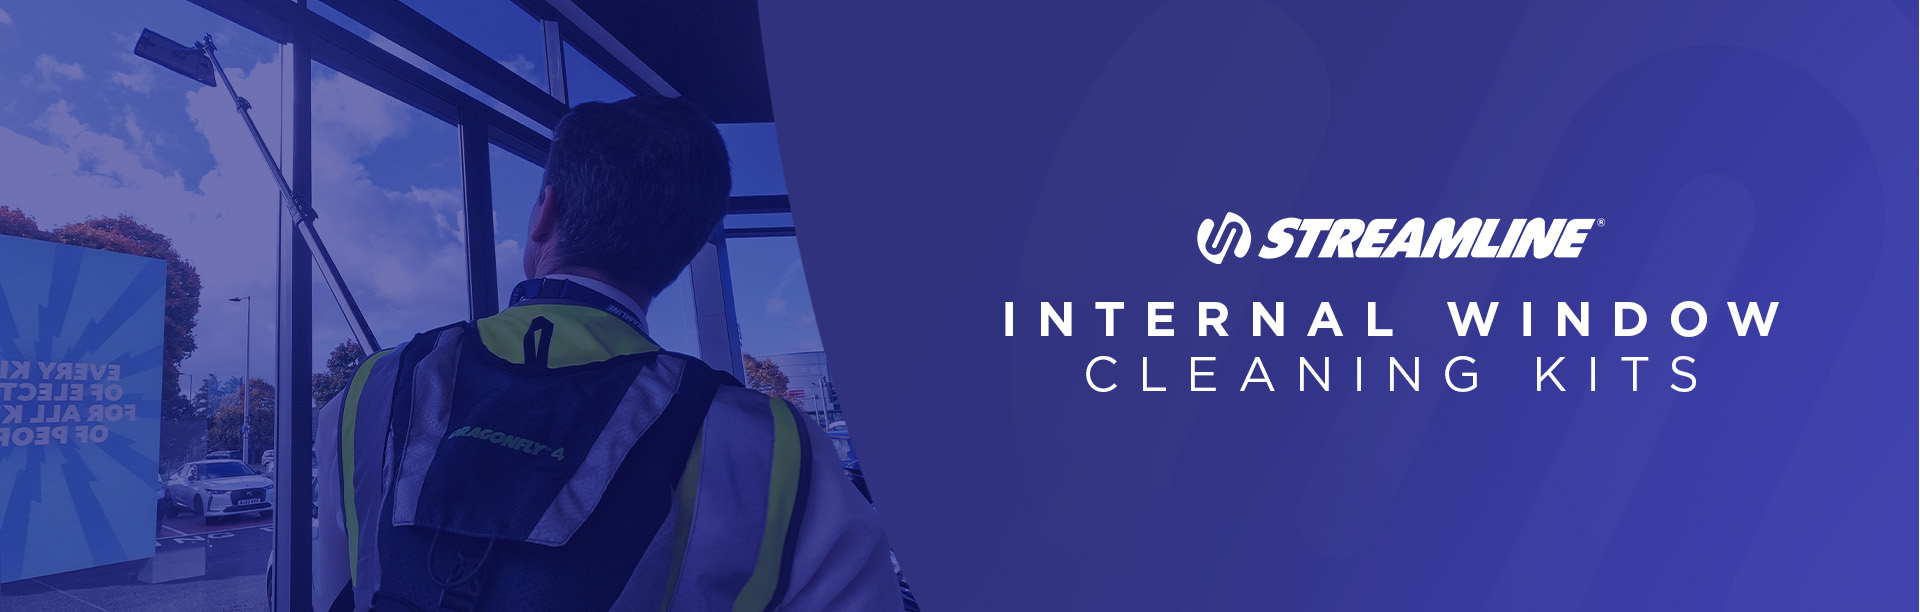 Internal Window Cleaning Kits banner